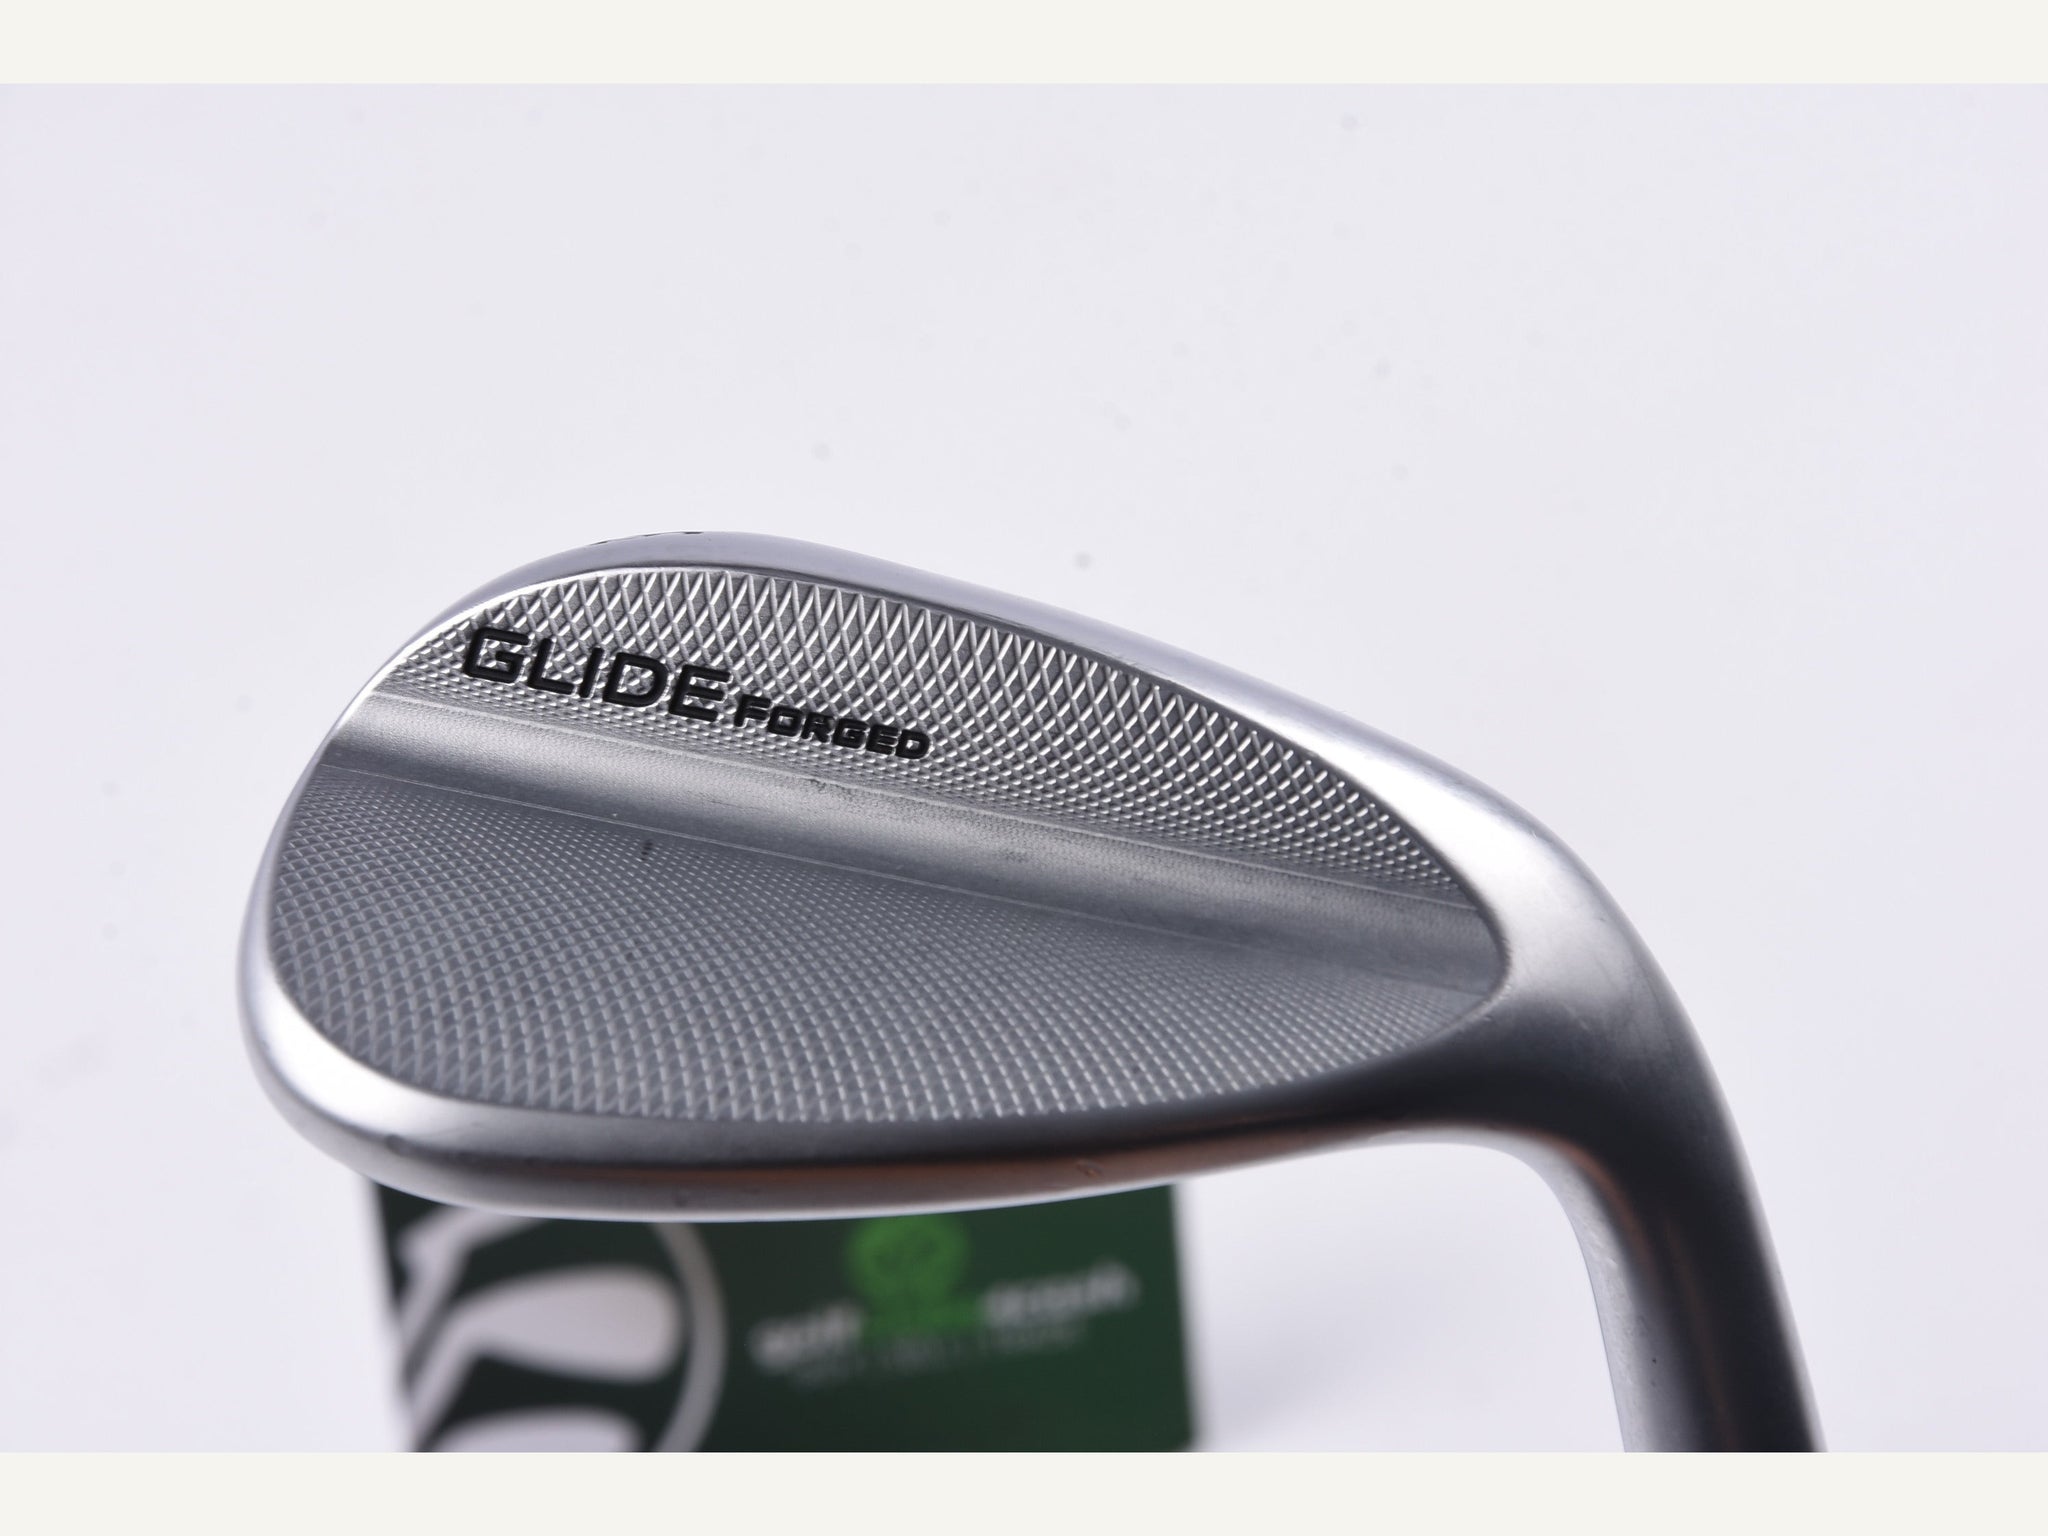 Ping Glide Forged Sand Wedge / 56 Degree / X-Flex N.S.PRO Modus 3 Tour